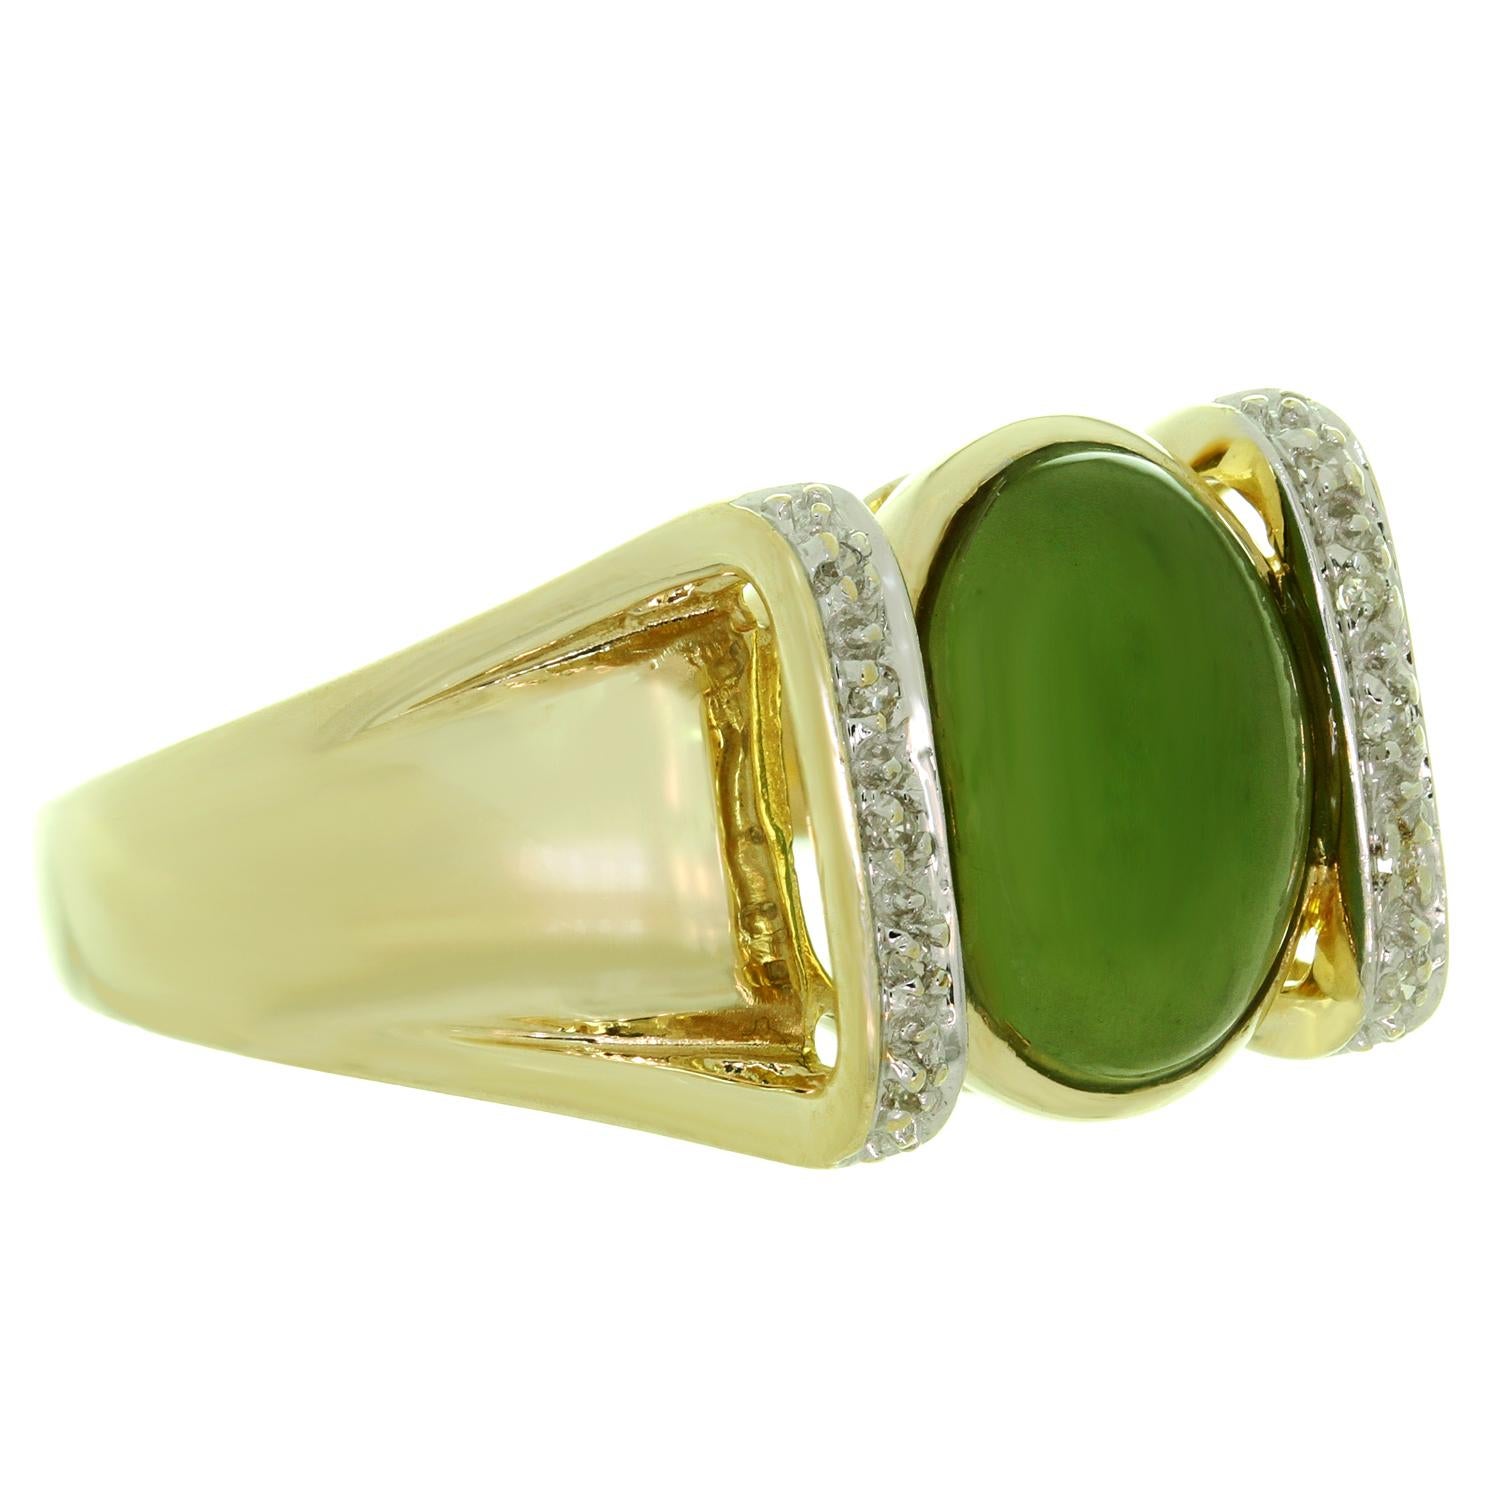 This classic estate nugget ring is crafted in 14k yellow gold and set with a green jade  stone in the center. Made in United States circa 1980s. Measurements: 0.74